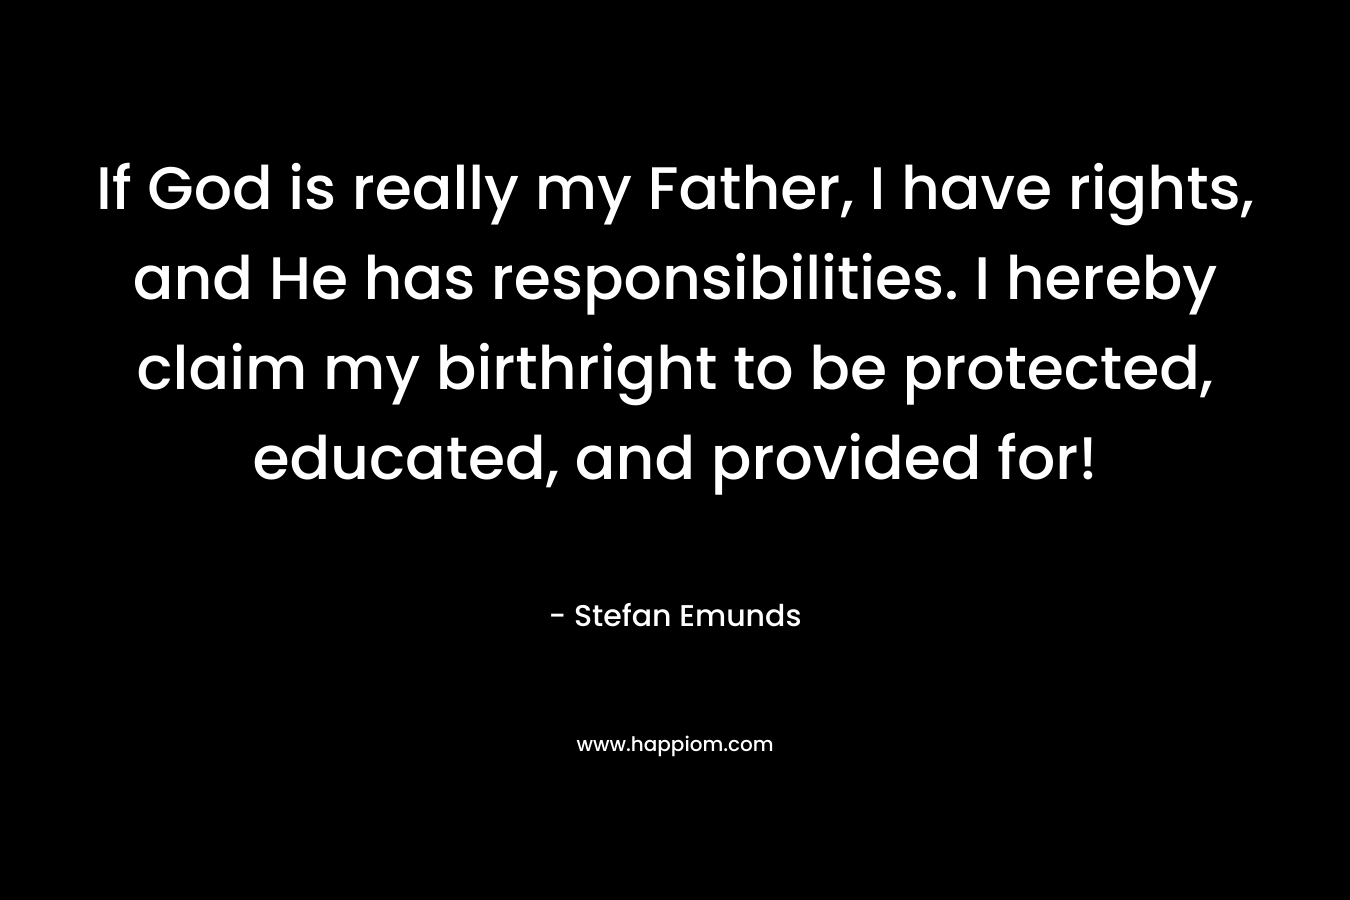 If God is really my Father, I have rights, and He has responsibilities. I hereby claim my birthright to be protected, educated, and provided for!